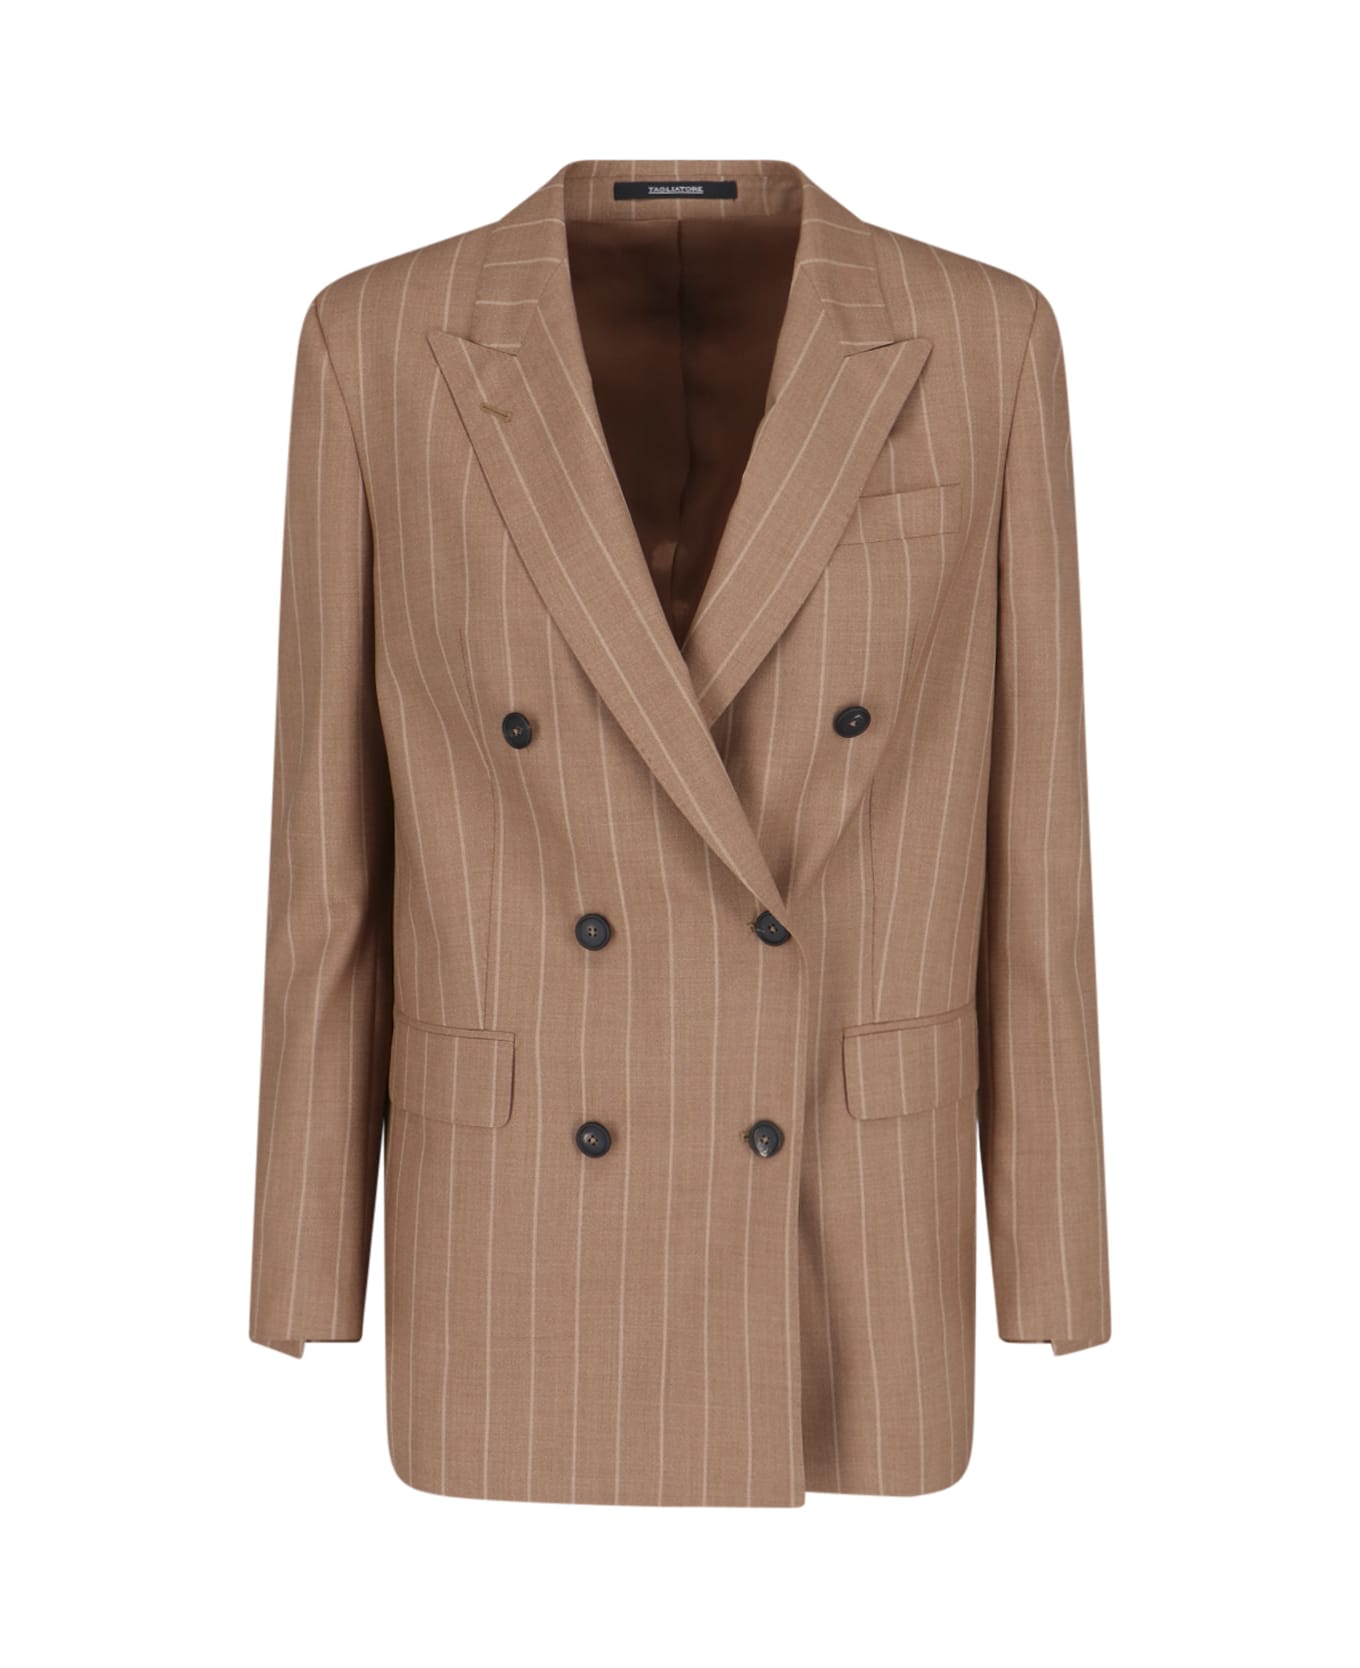 Tagliatore Double-breasted Suit - Brown ブレザー